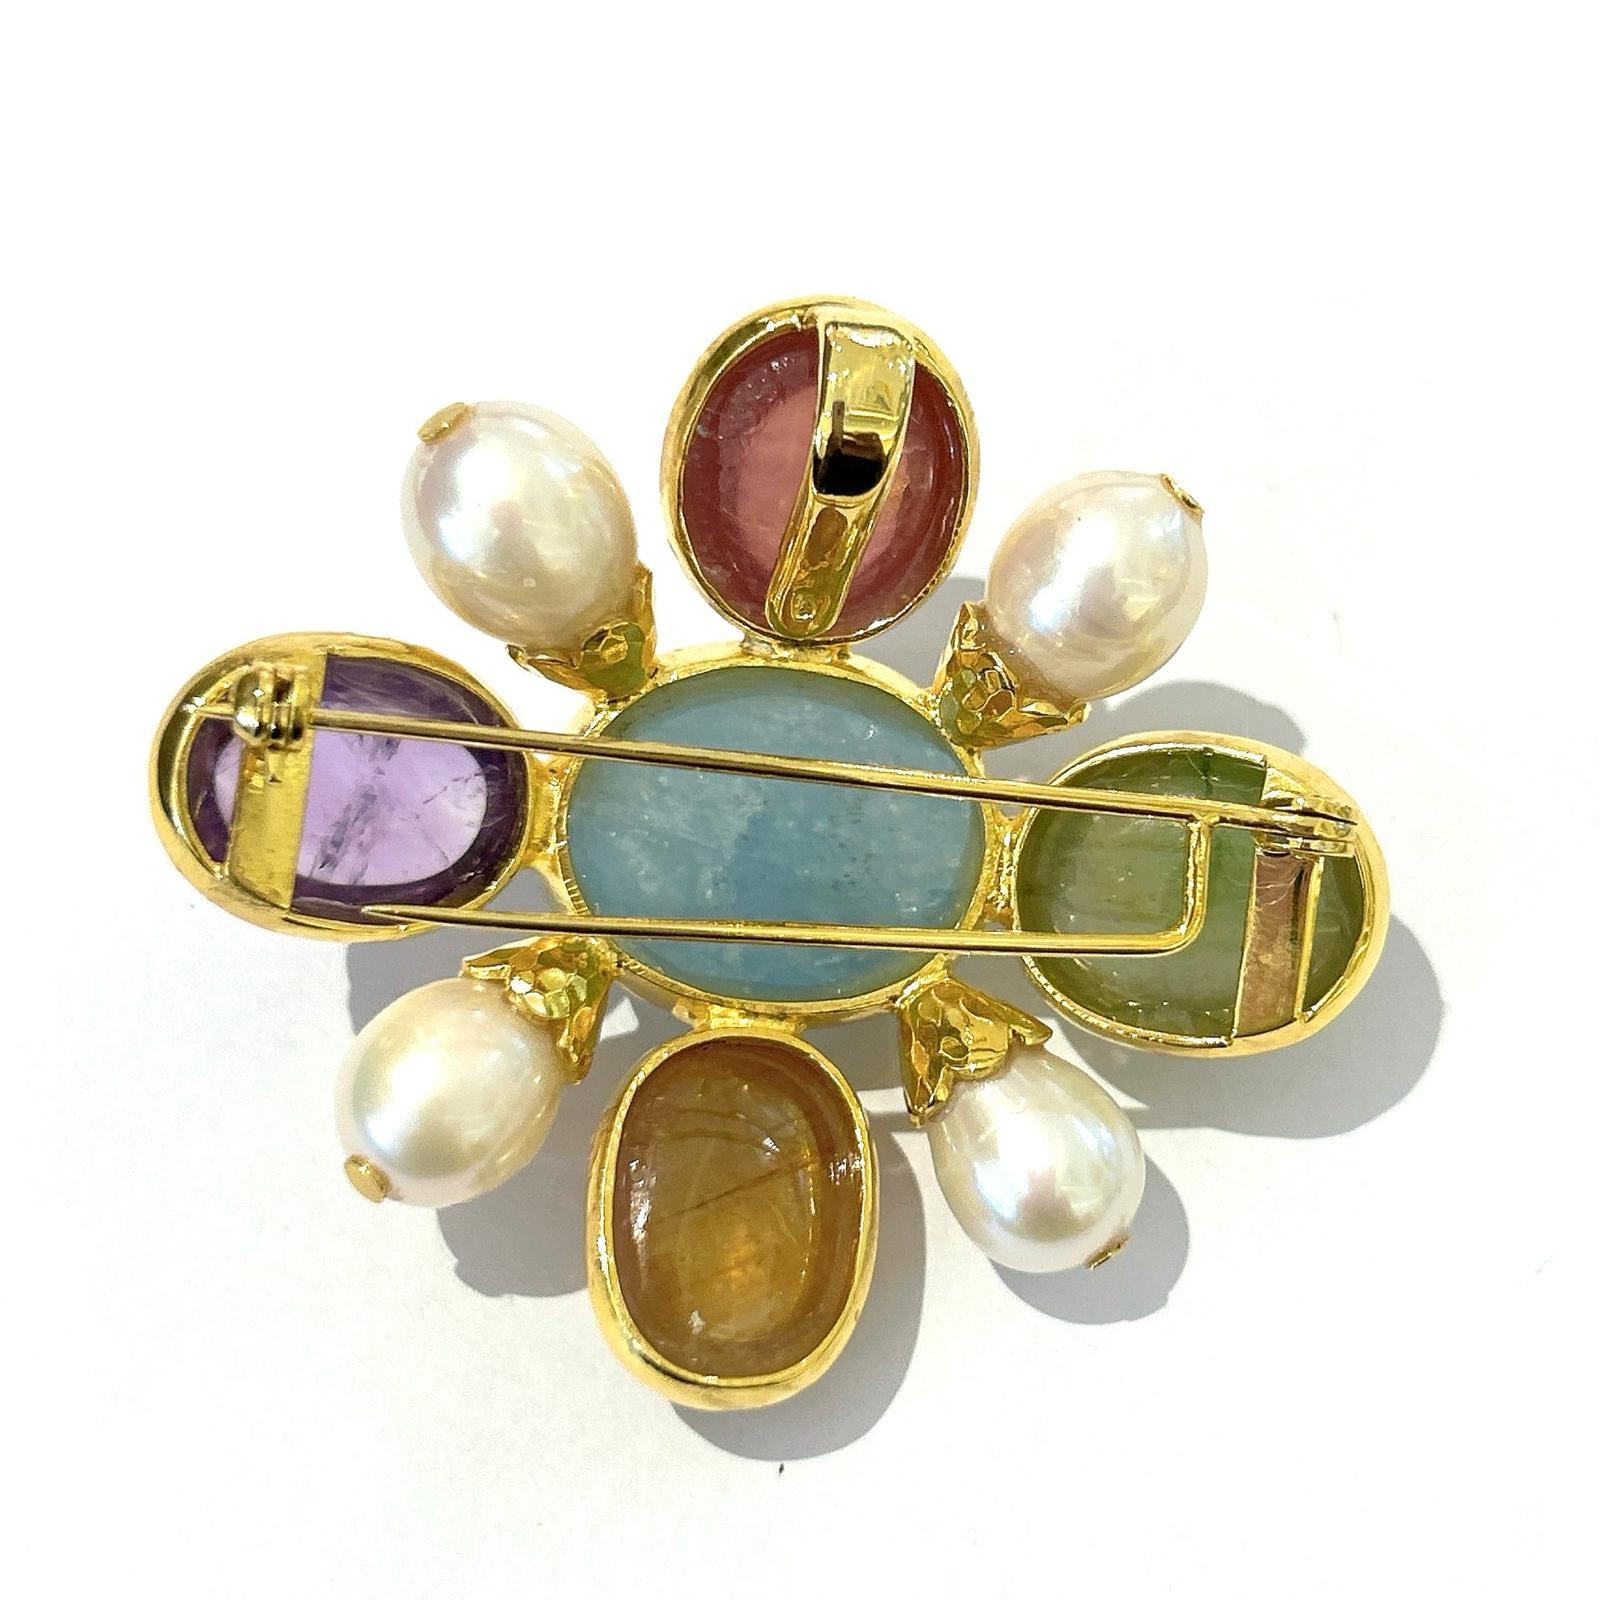 Bochic “Orient” Italian Multi Sapphires & Multi Gem Brooch Set In 18K Gold & Silver 

Natural Aquamarine, Oval shape - 25 carat 
Natural Sapphires from Sri Lanka 
51 carat
Natural Amethyst - 14 Carat  
White South Sea Pearls 

The Brooch is from the